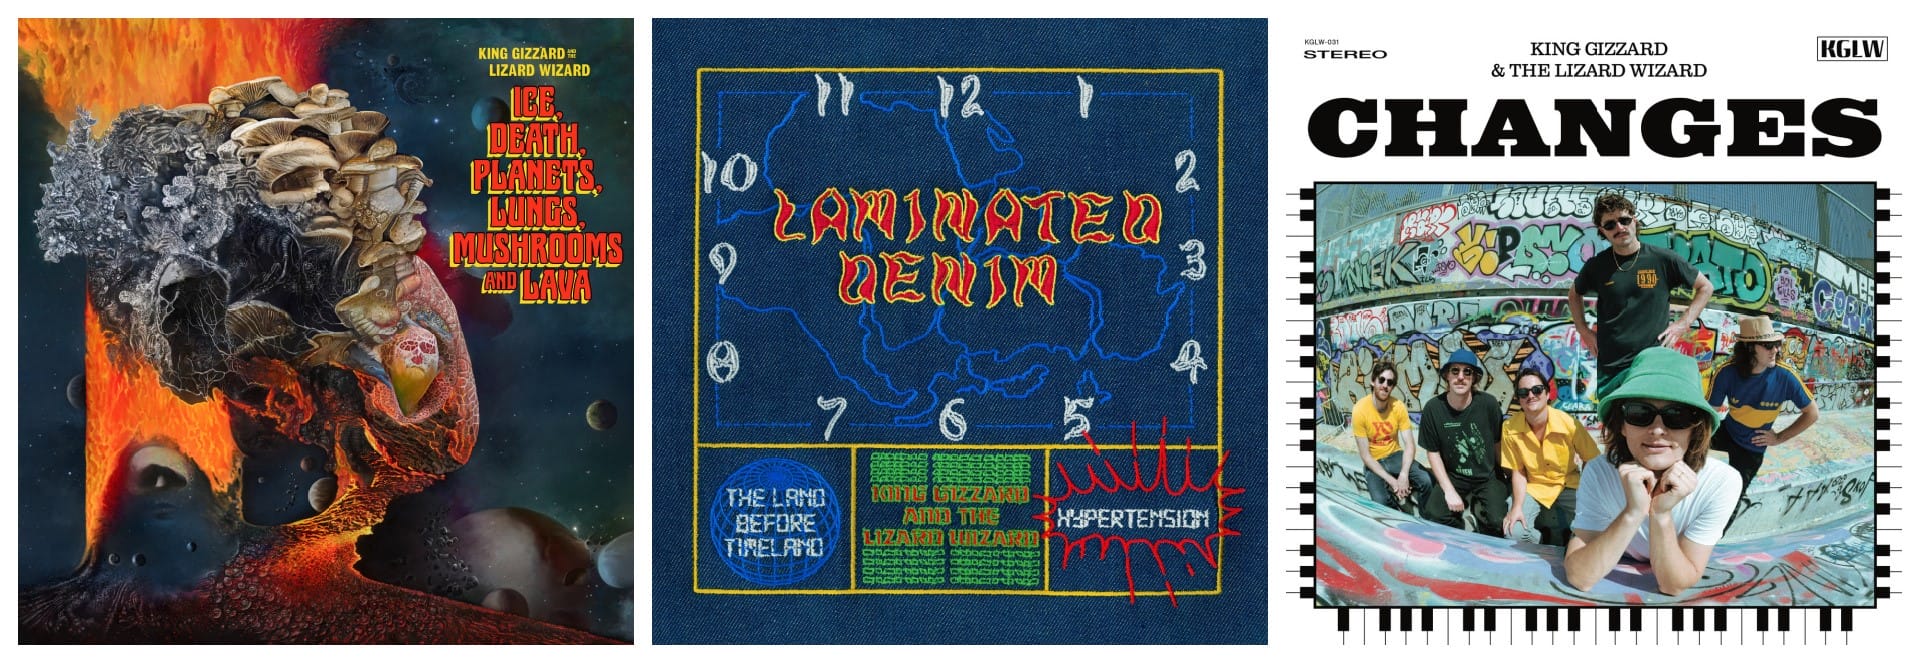 King Gizzard & the Lizard Wizard - Ice, Death, Planets, Lungs, Mushrooms and Lava | Laminated Denim | Changes